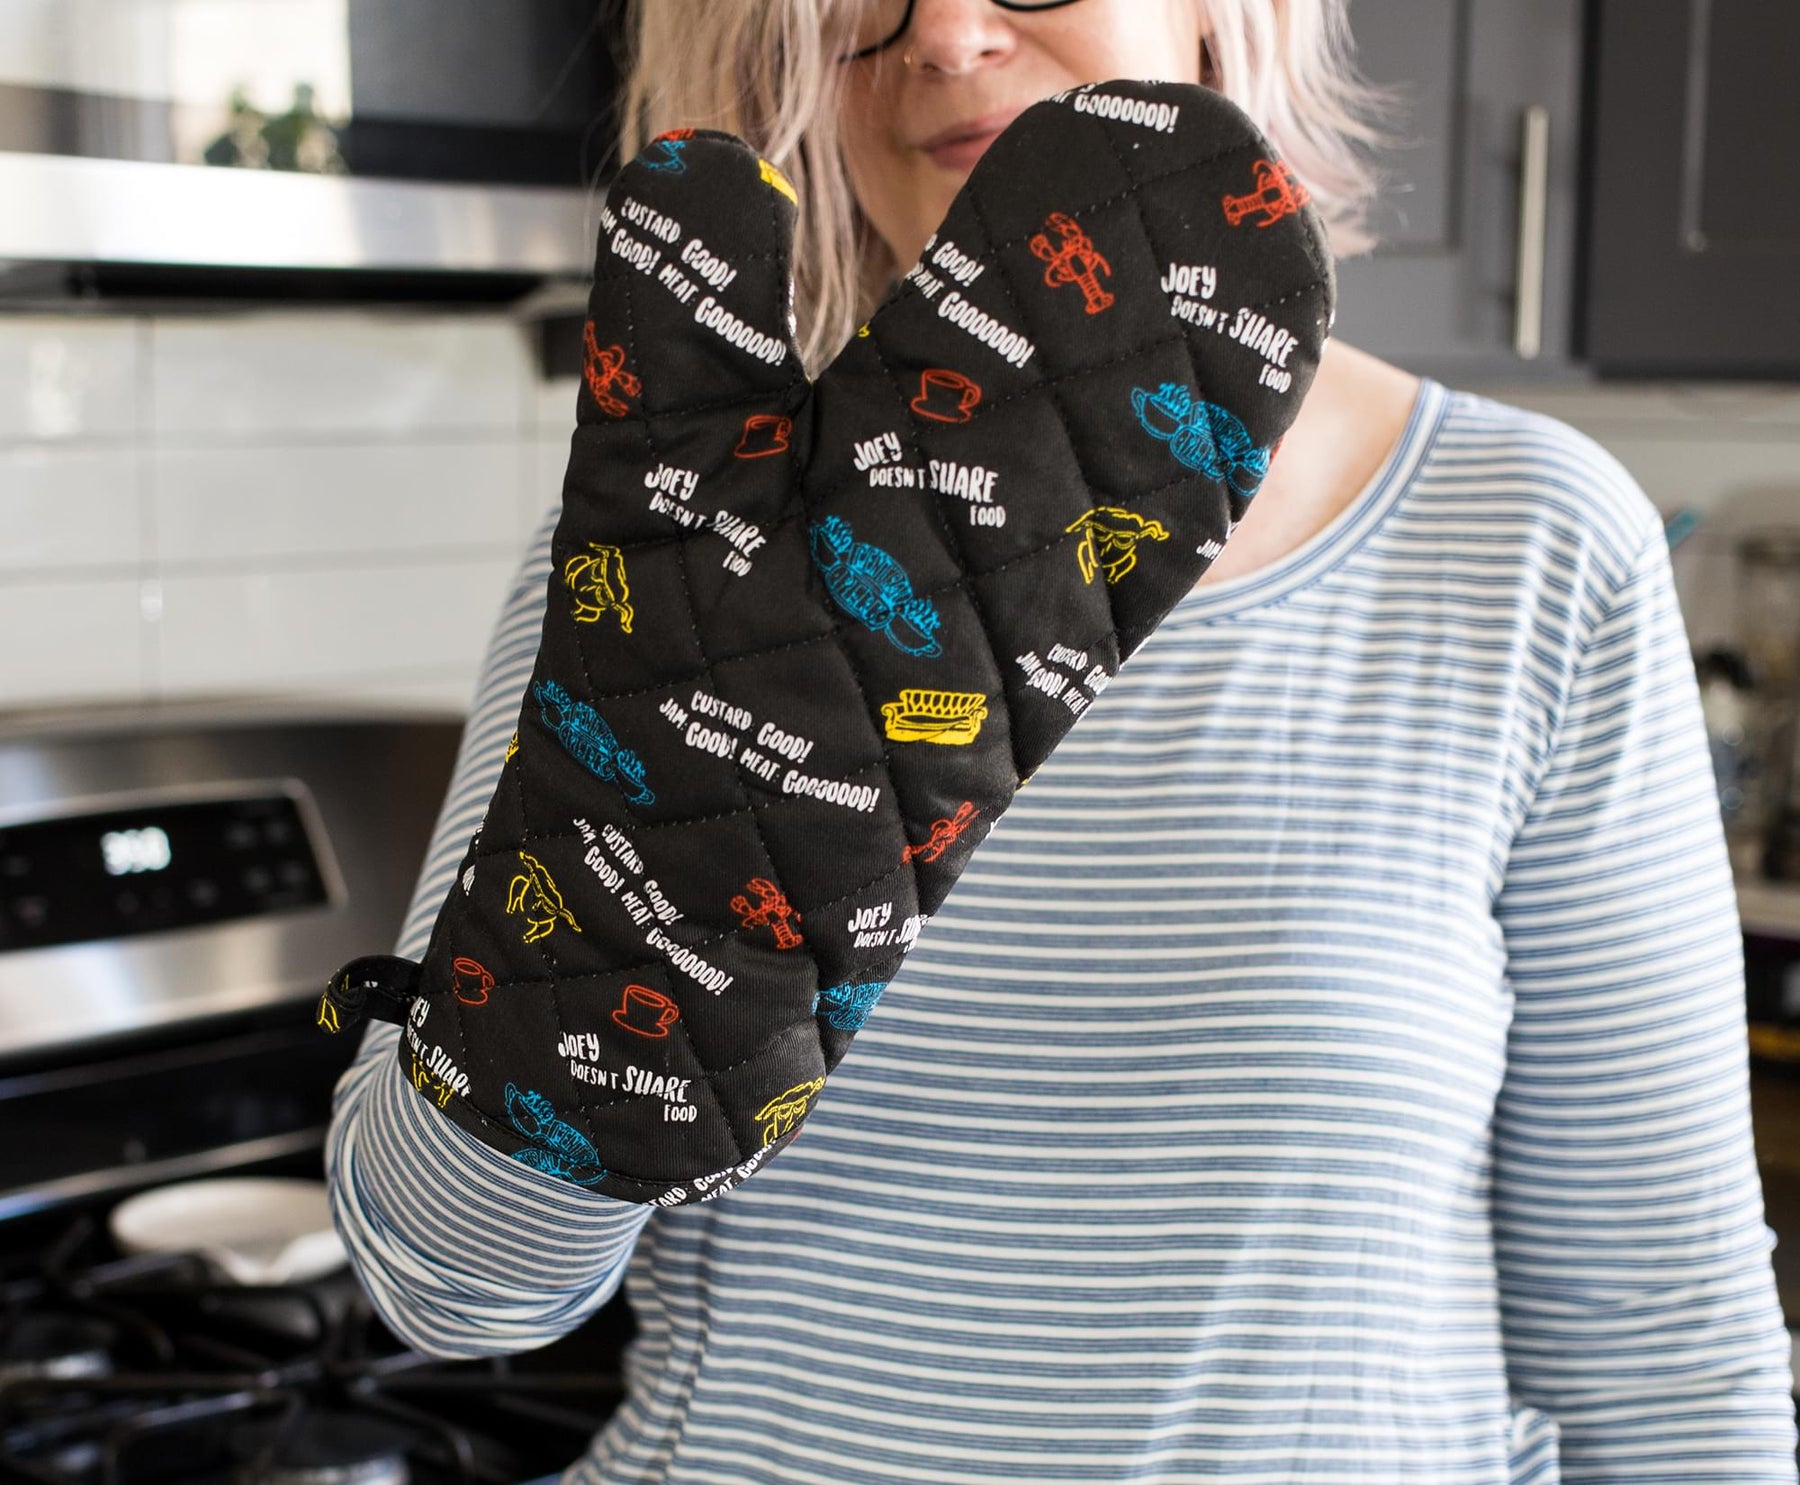 Friends Icons & Quotes Black Oven Mitt Glove